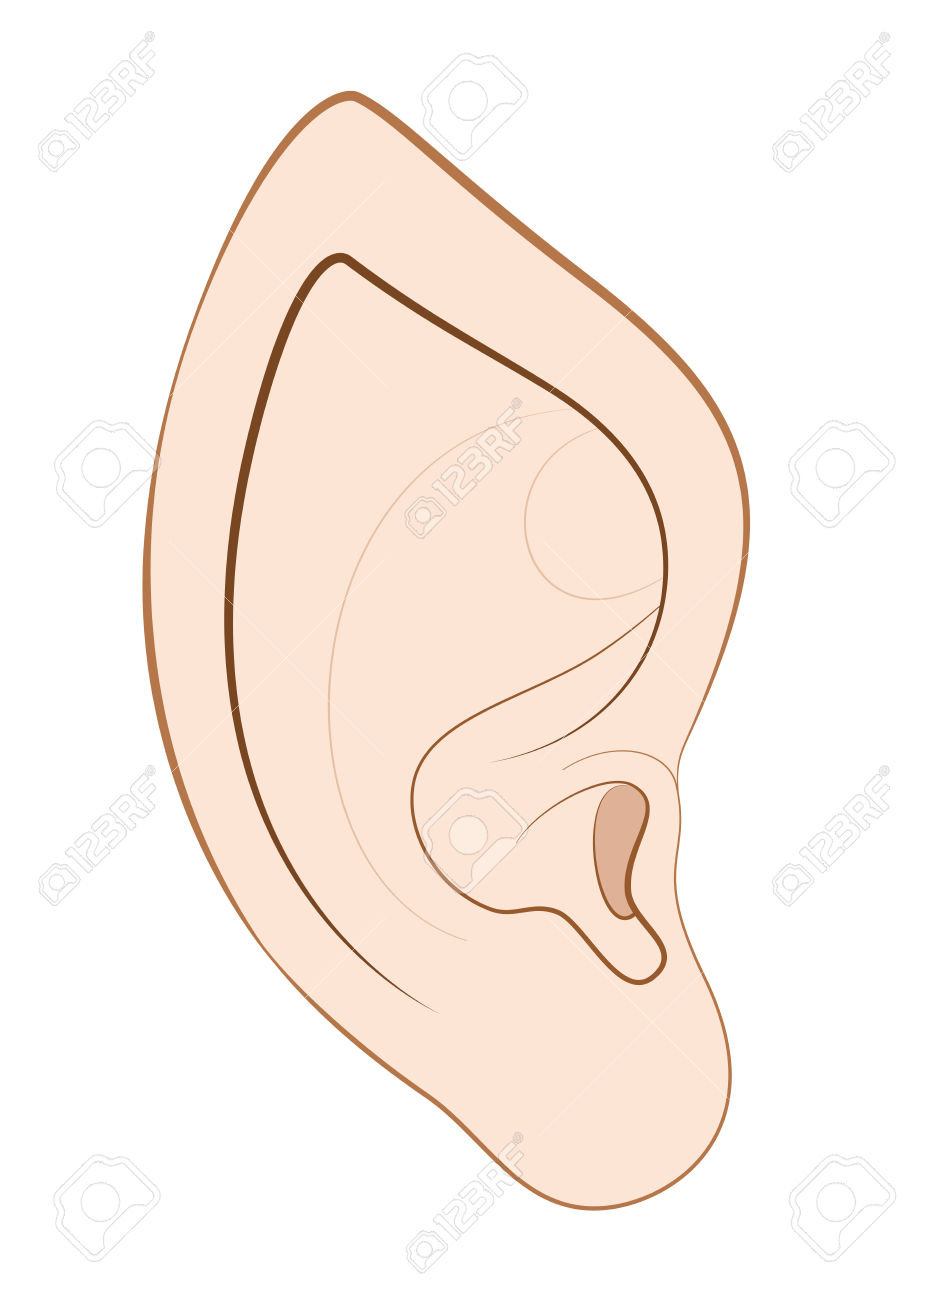 Pointed Ears clipart #15, Download drawings